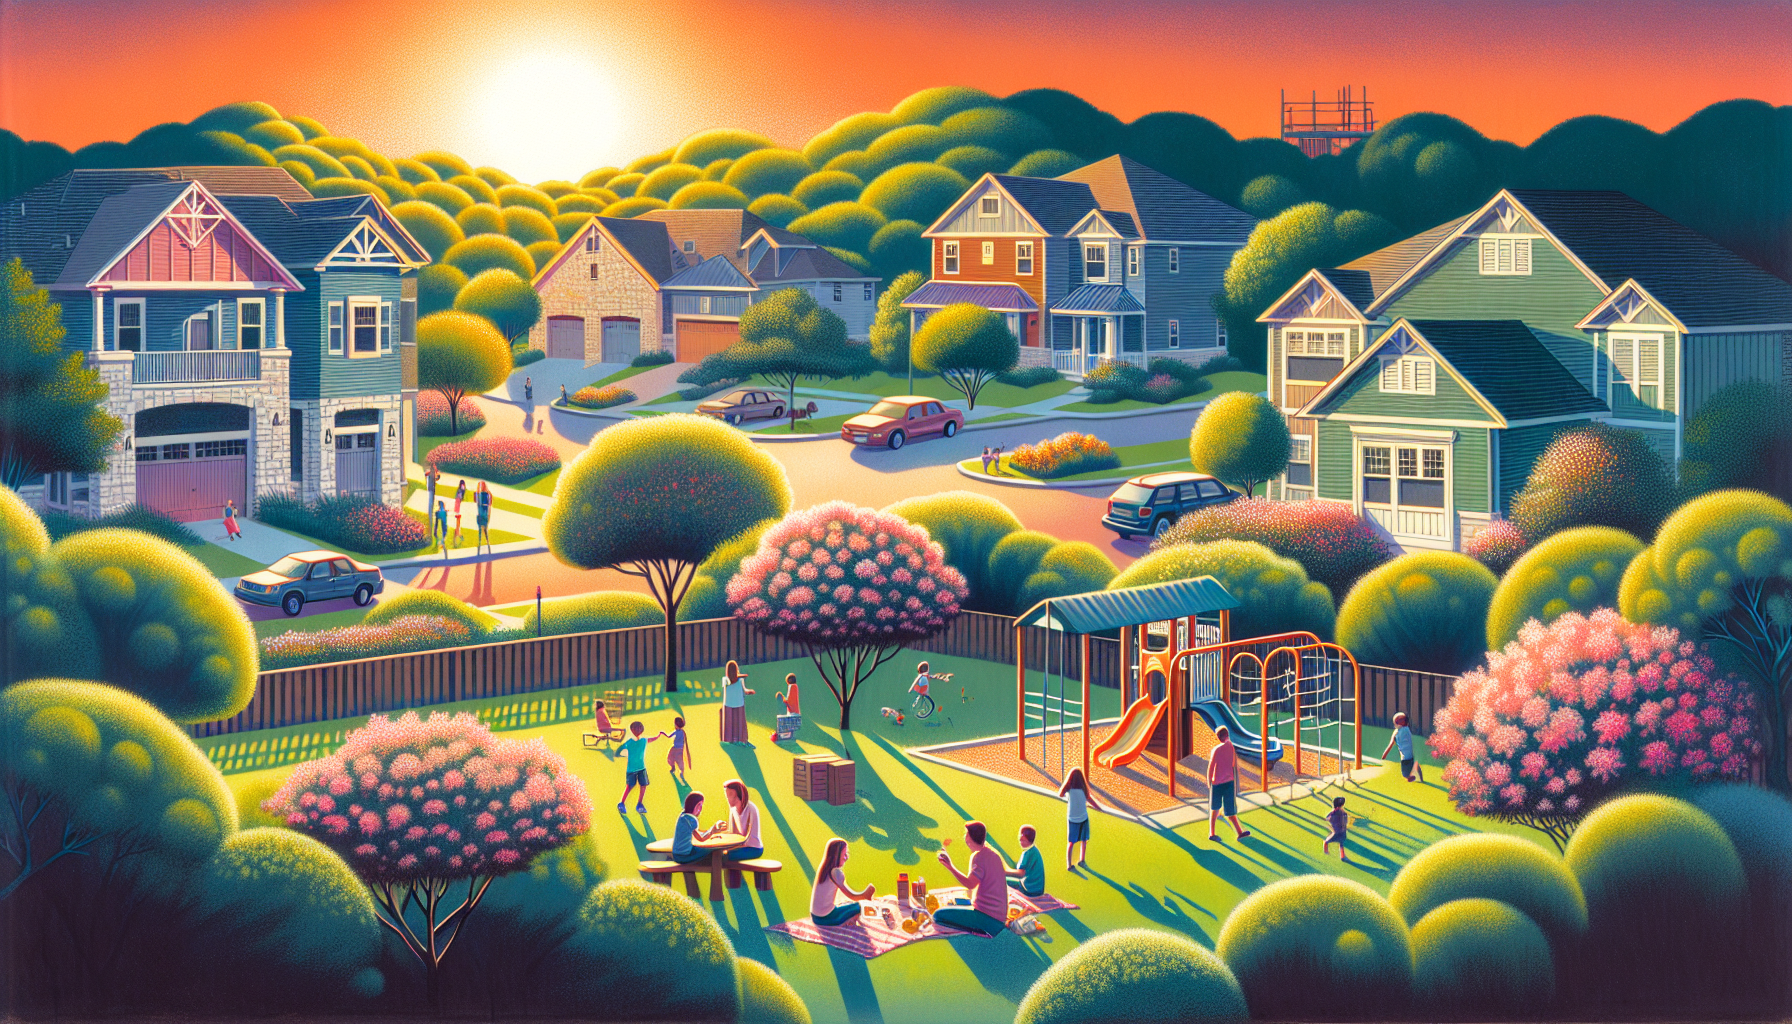 Illustration of suburban neighborhood in North Austin with family-friendly amenities